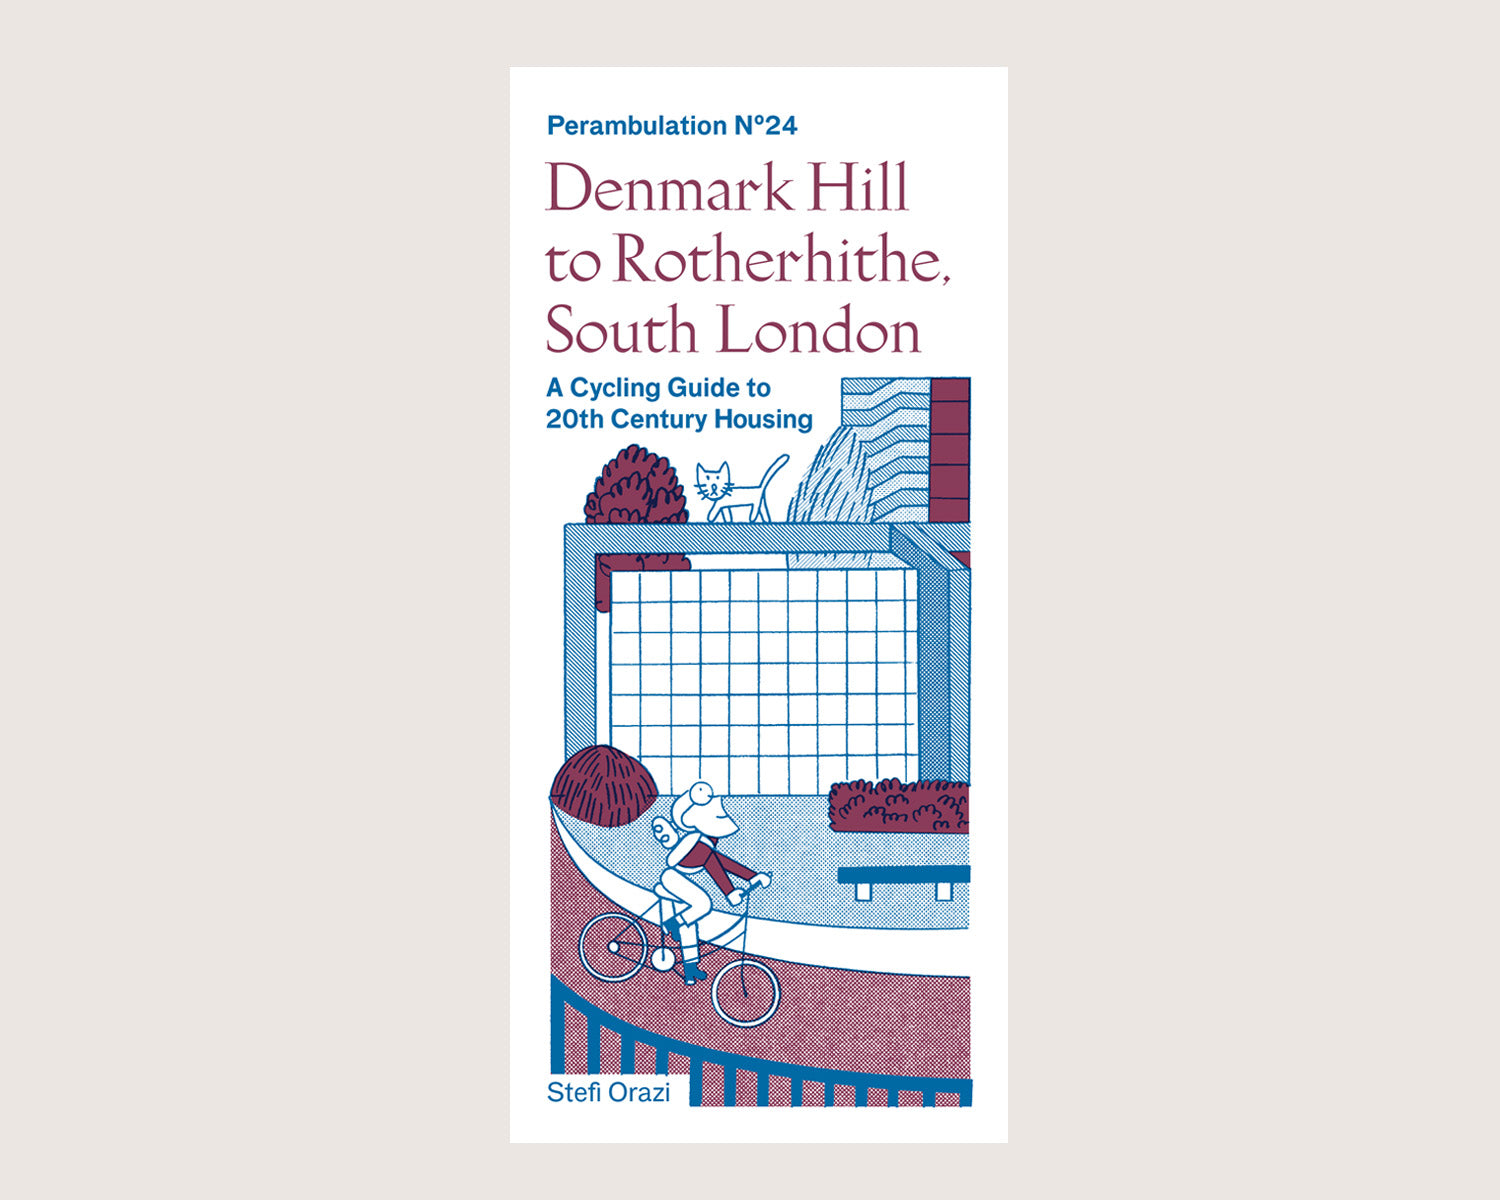 PRE-ORDER SPECIAL PRICE Perambulation Nº24—Cycling Guide, Denmark Hill to Rotherhithe, South London by Stefi Orazi